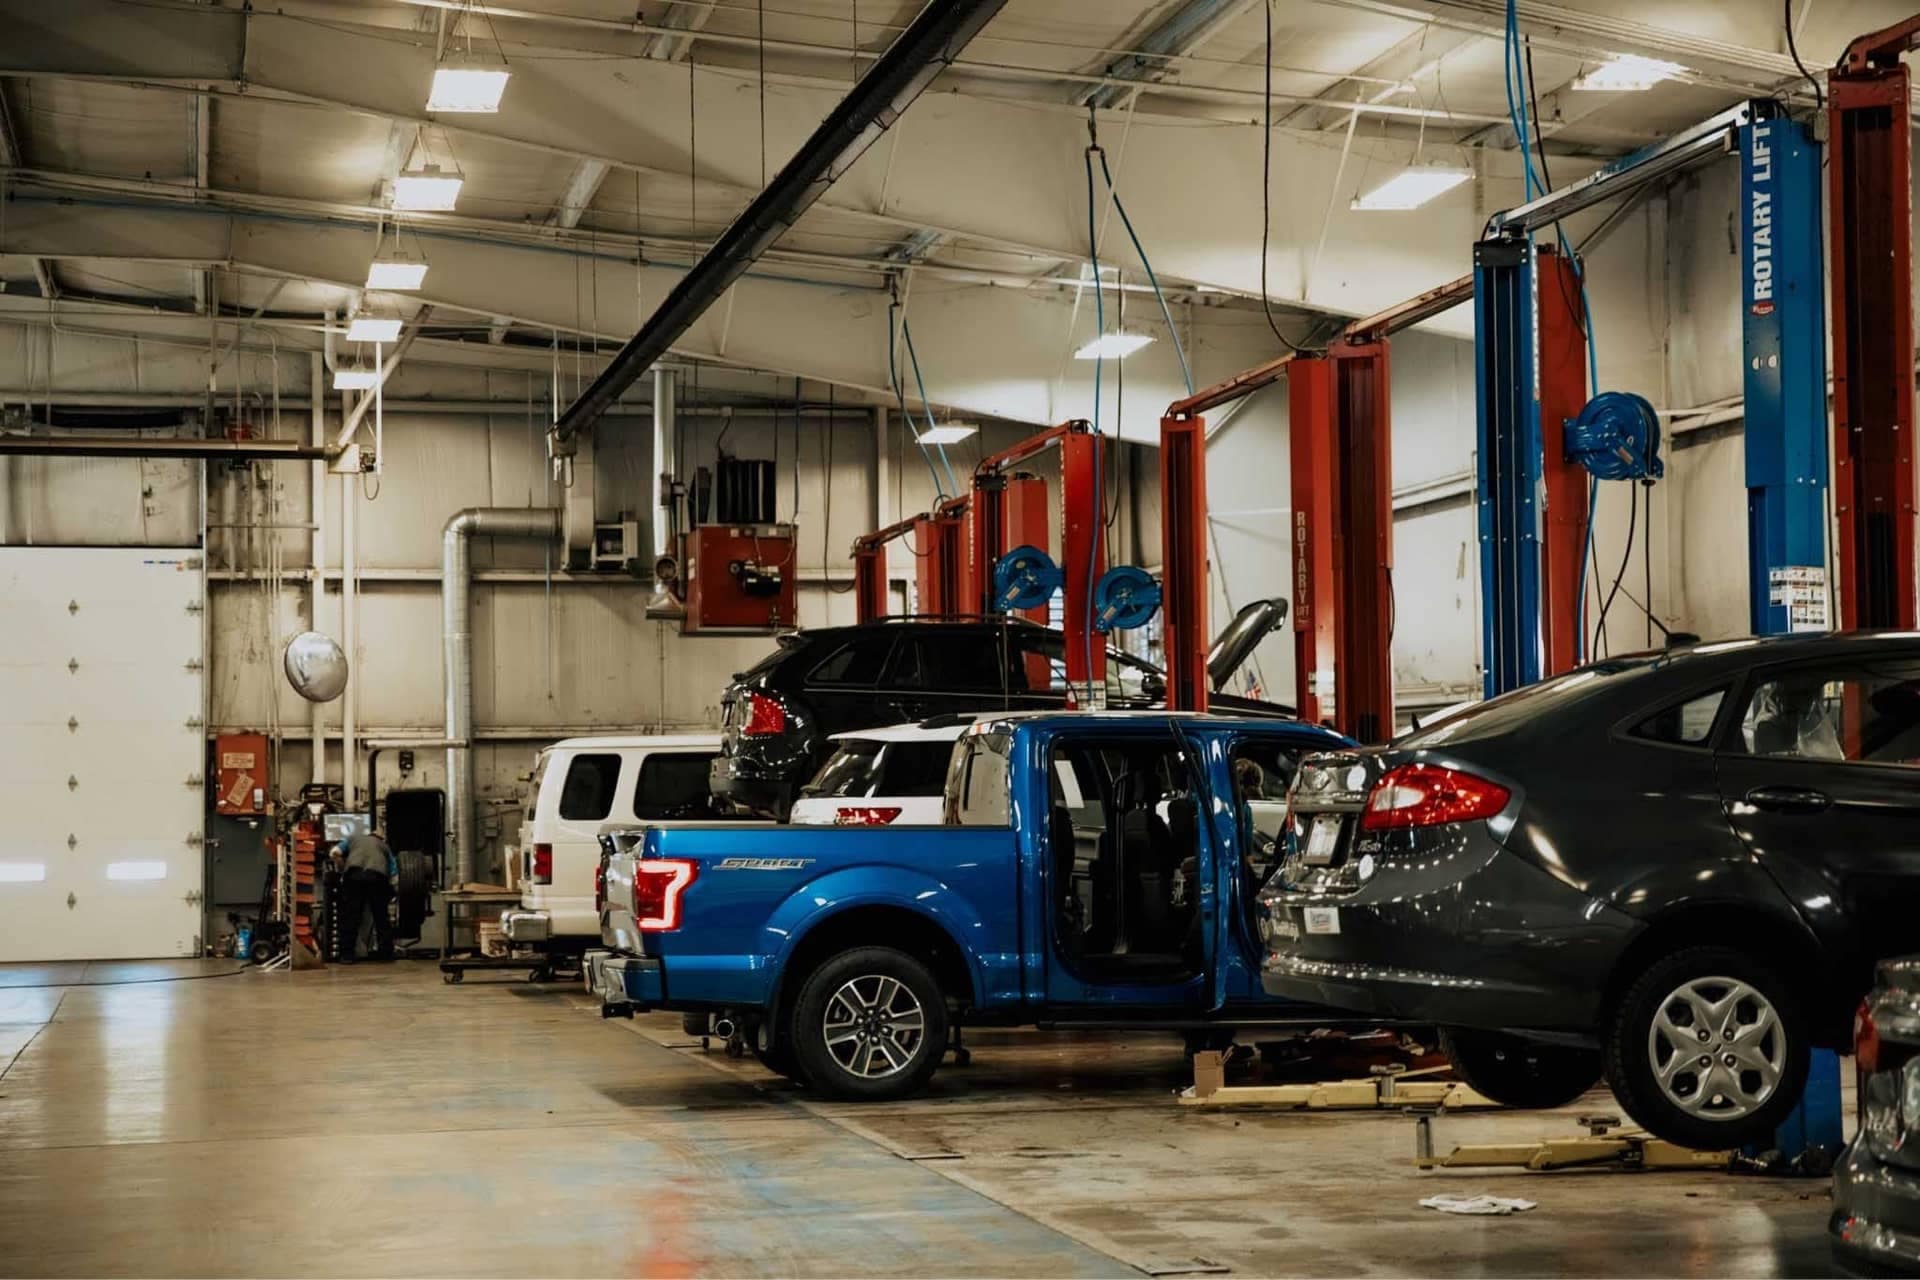 Service garage with vehicles being serviced